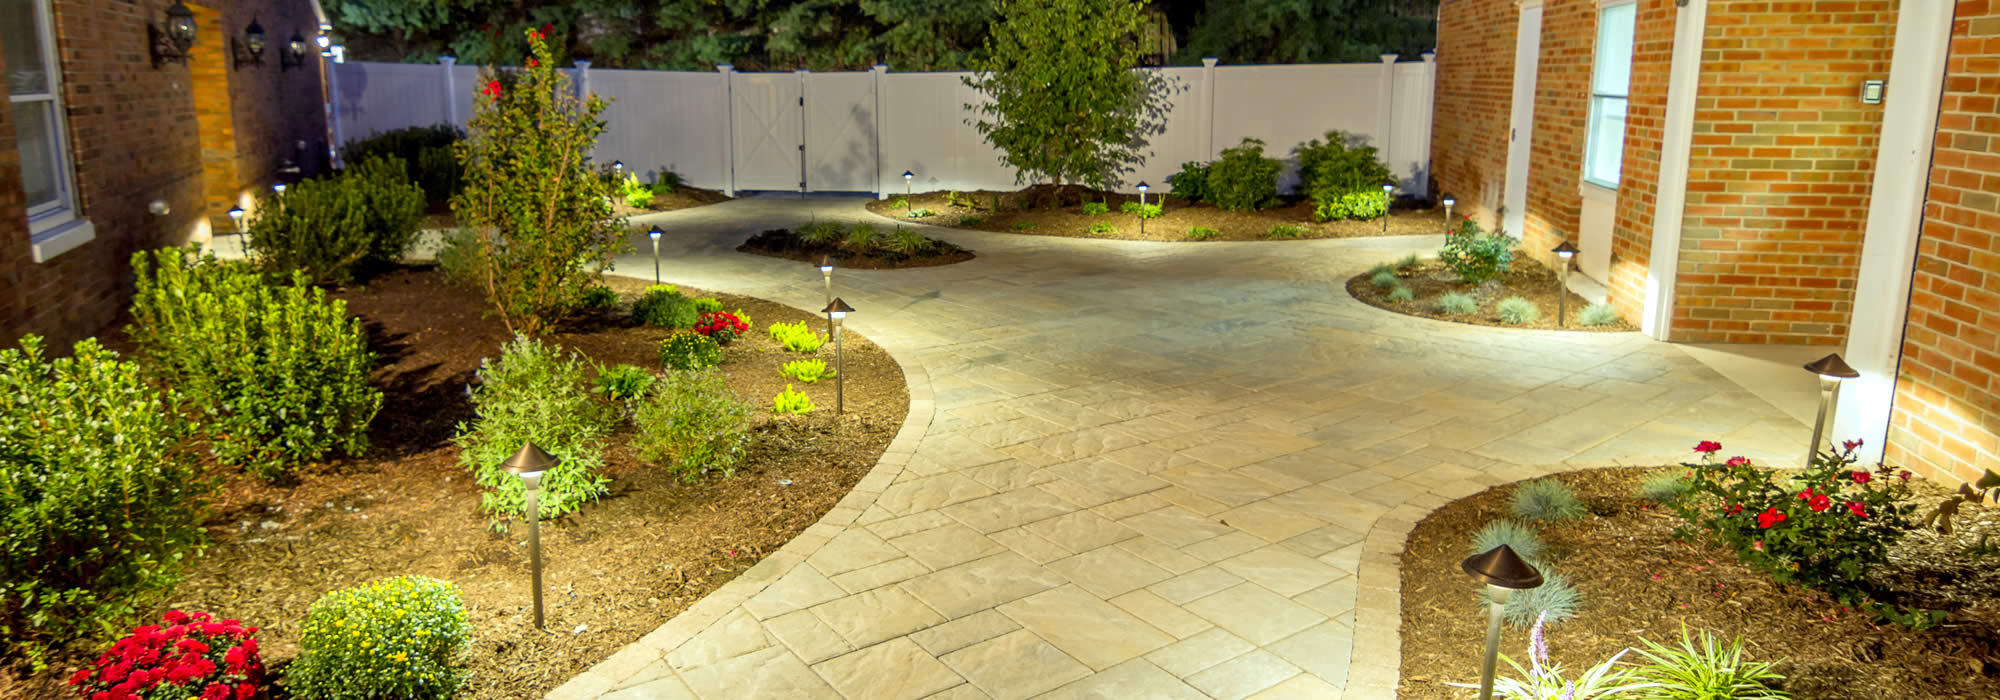 Landscaping Services in Deerfield